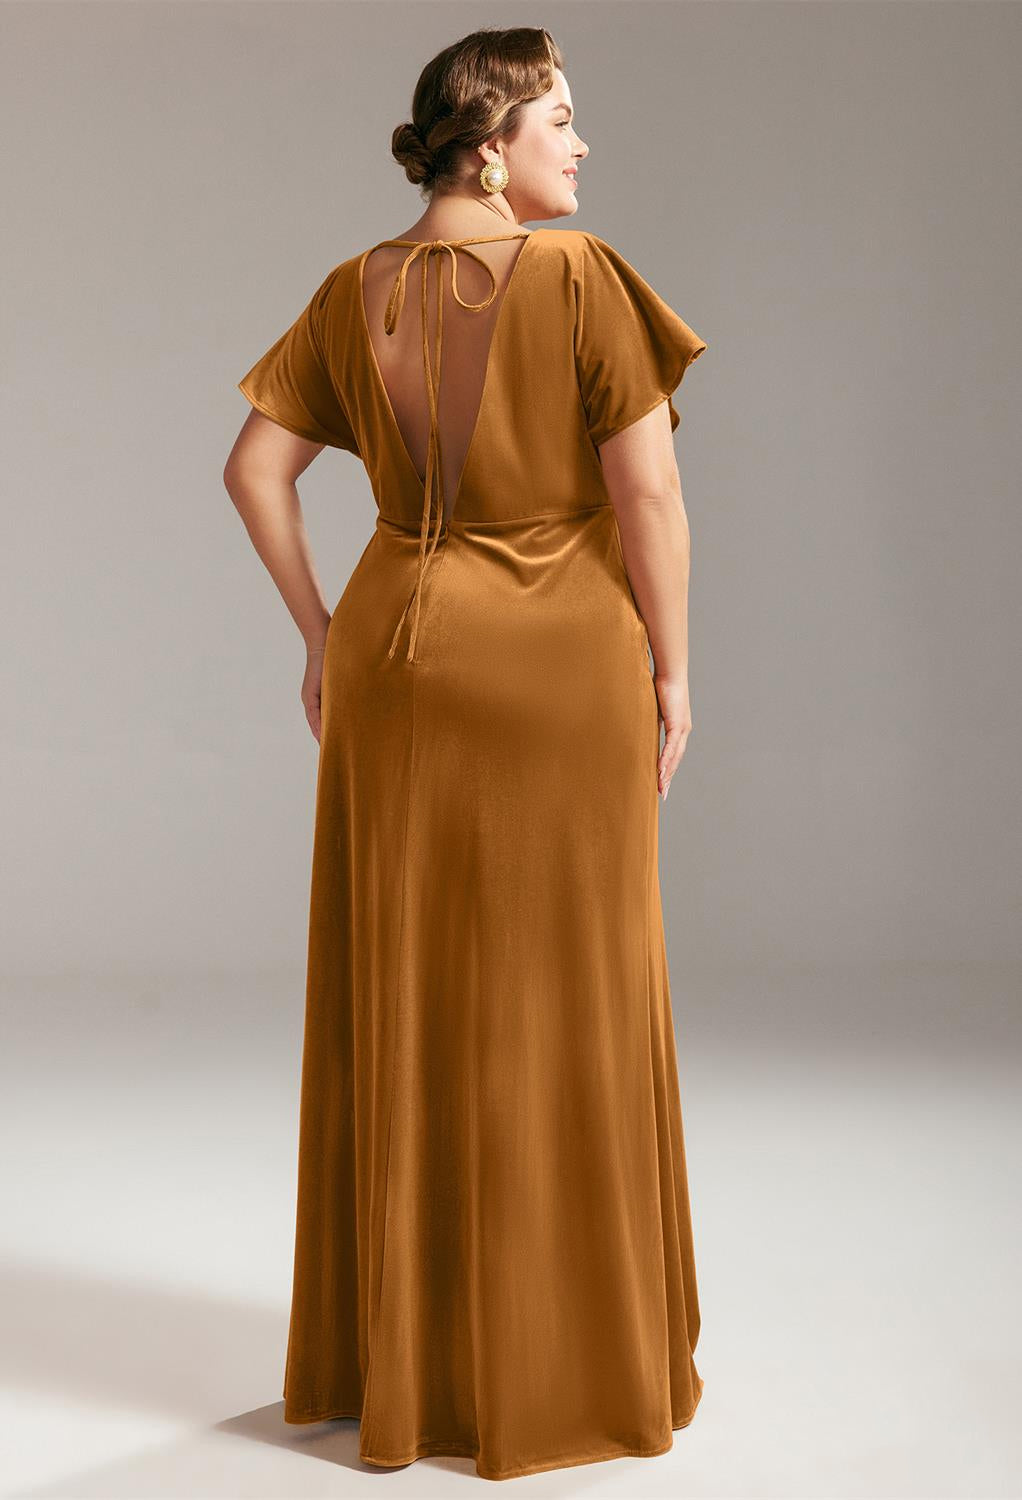 The back view of a plus size woman wearing the Meara - Velvet Bridesmaid Dress - Off The Rack gown for a bridesmaid dress in London by Bergamot Bridal.